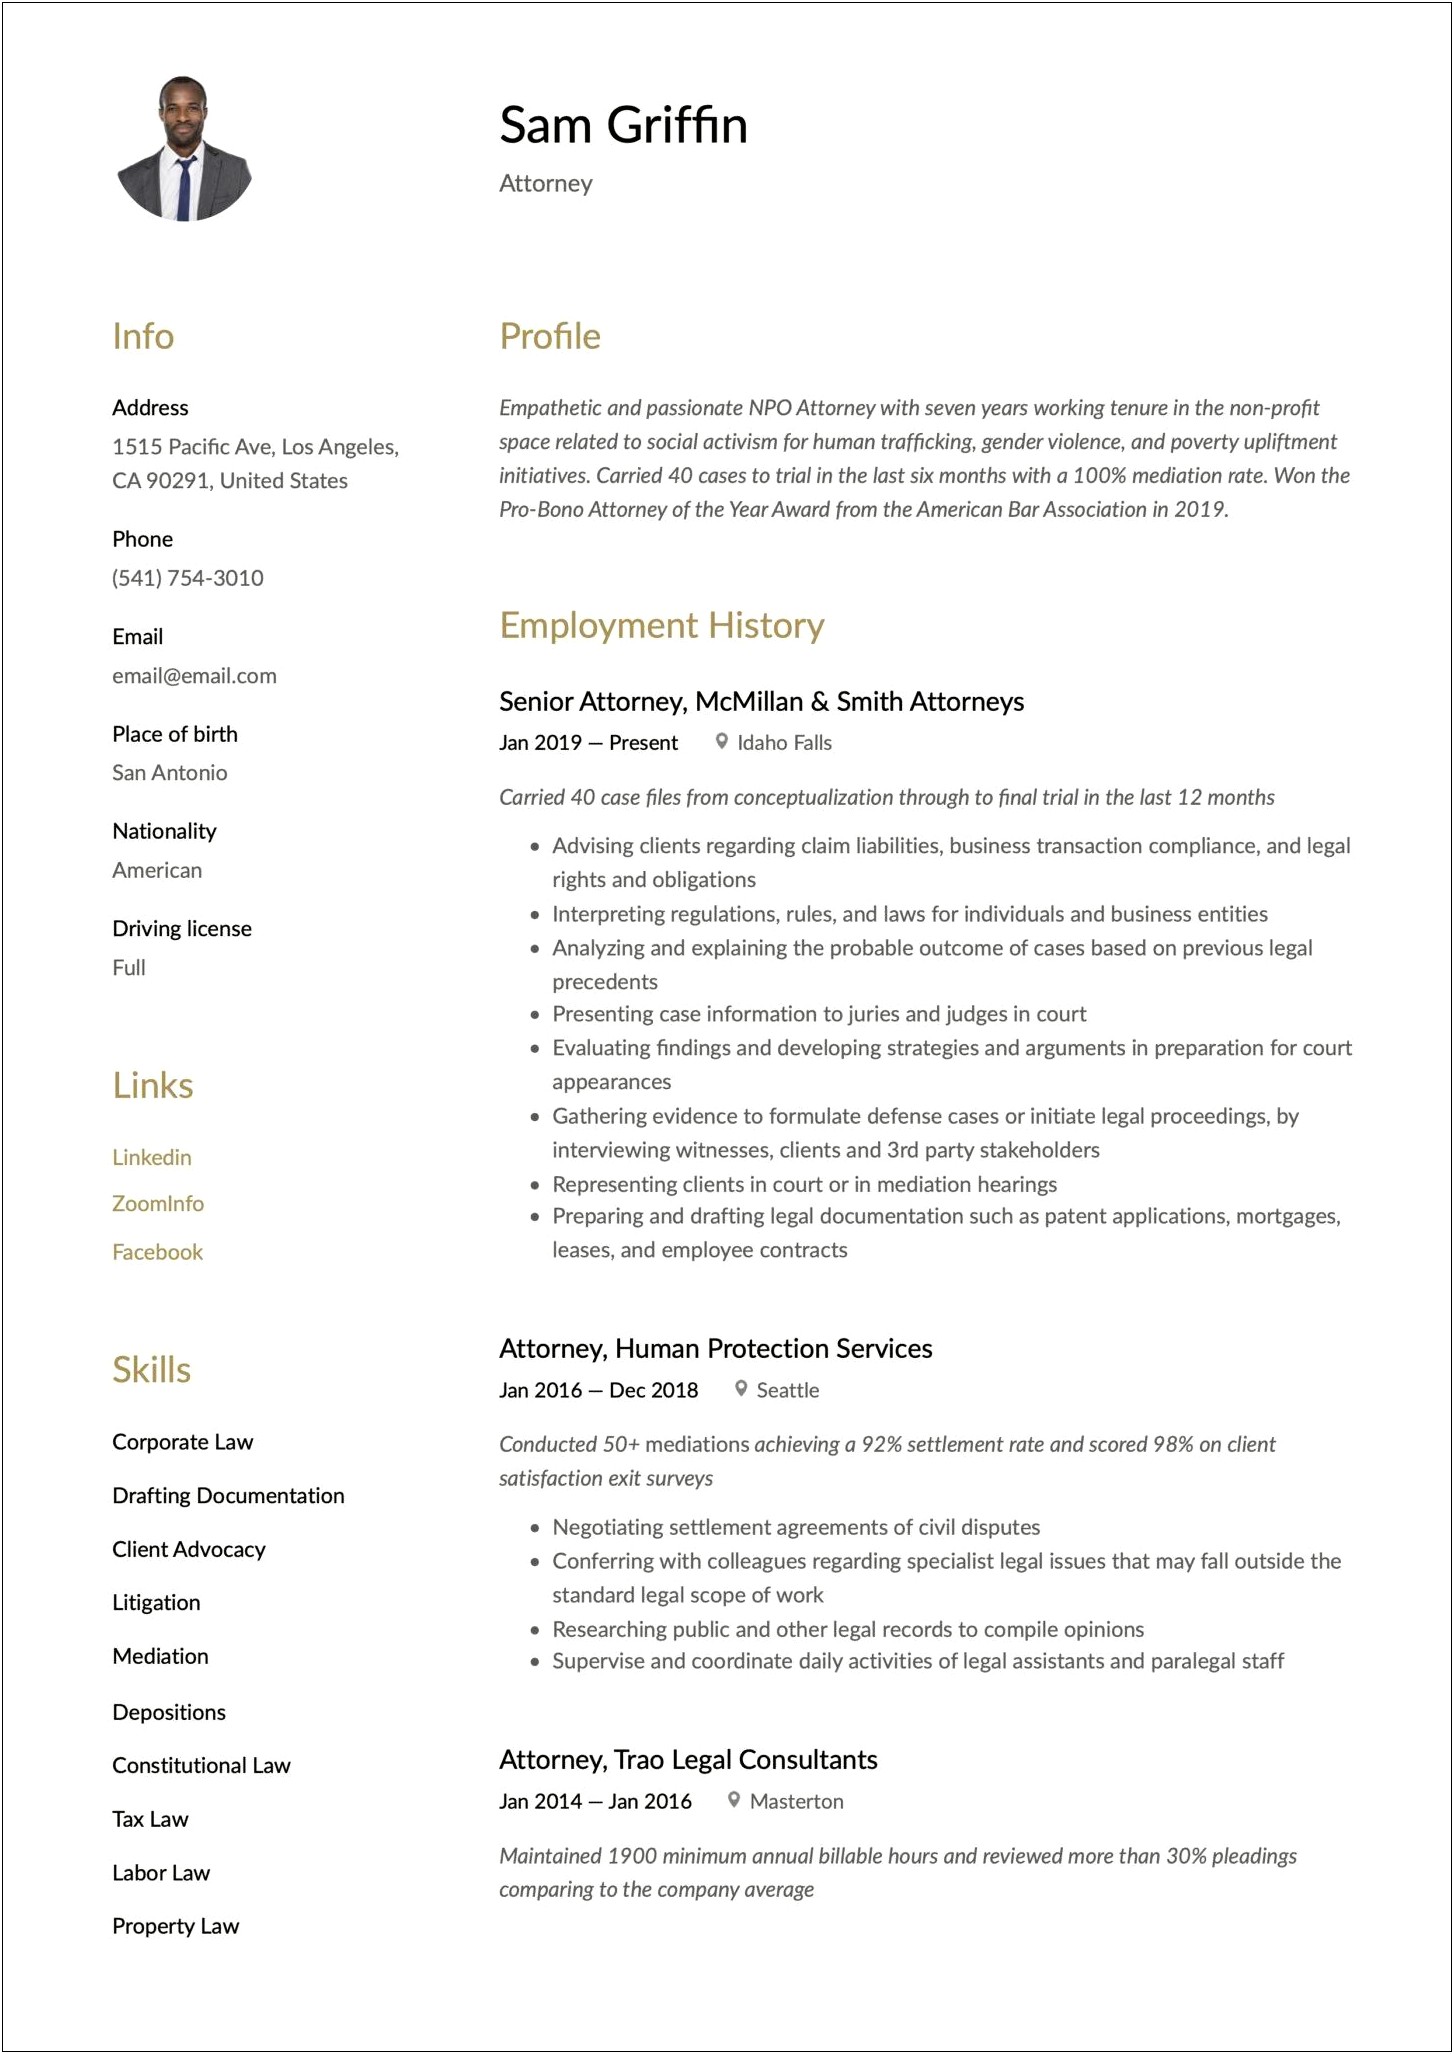 Free Resume Templates For Lawyers